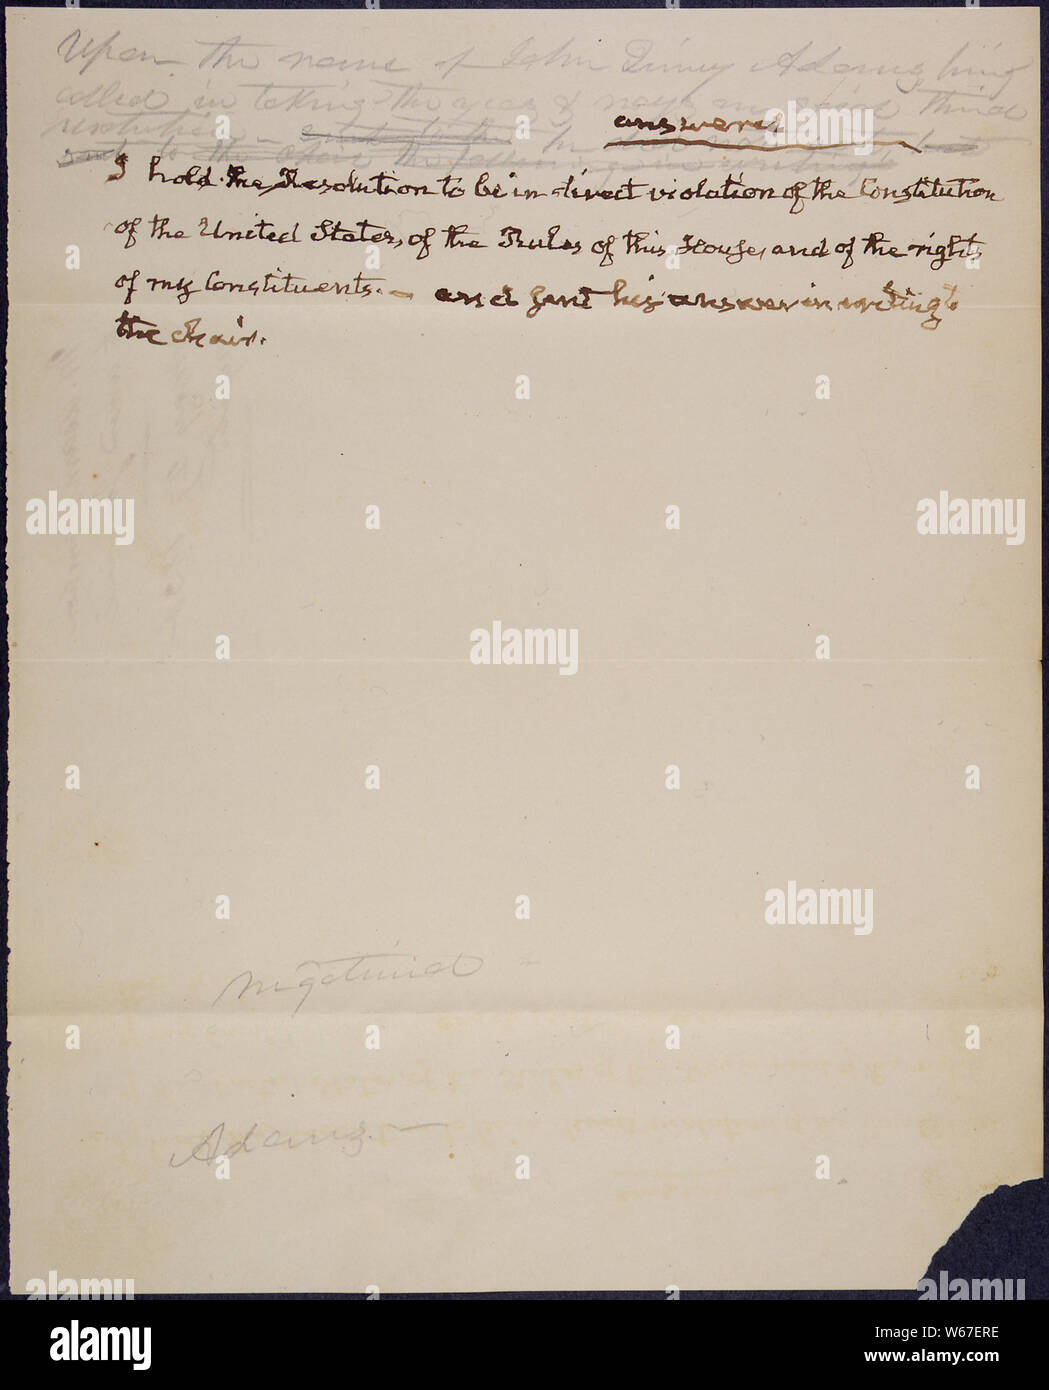 Motion offered by John Quincy Adams to amend the House Journal to include his statement that the recently passed gag rule was in direct violation of the Constitution, the Rules of the House of Representatives, and the rights of his constituents.; Scope and content:  The gag rule resolution that Adams is protesting stated that All petitions, memorials, resolutions, propositions, or papers, relating in any way, or to any extent whatsoever, to the subject of slavery, shall, without being either printed or referred, be laid upon the table, and that on further action whatever shall be had thereon. Stock Photo